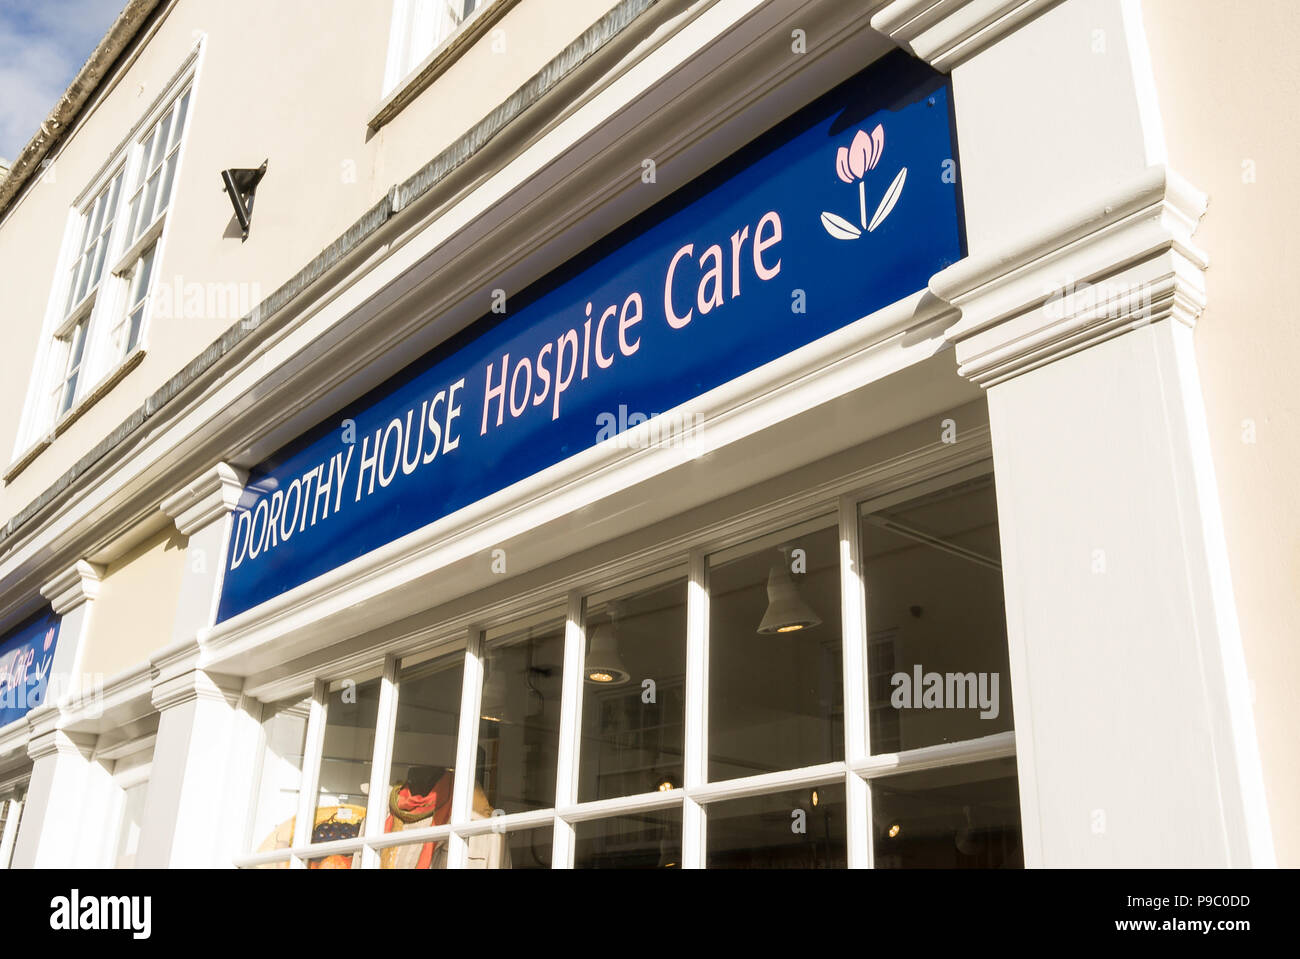 DOROTHY HOUSE HOSPICE CARE fundraising charity shop in Devizes Wiltshire England UK Stock Photo